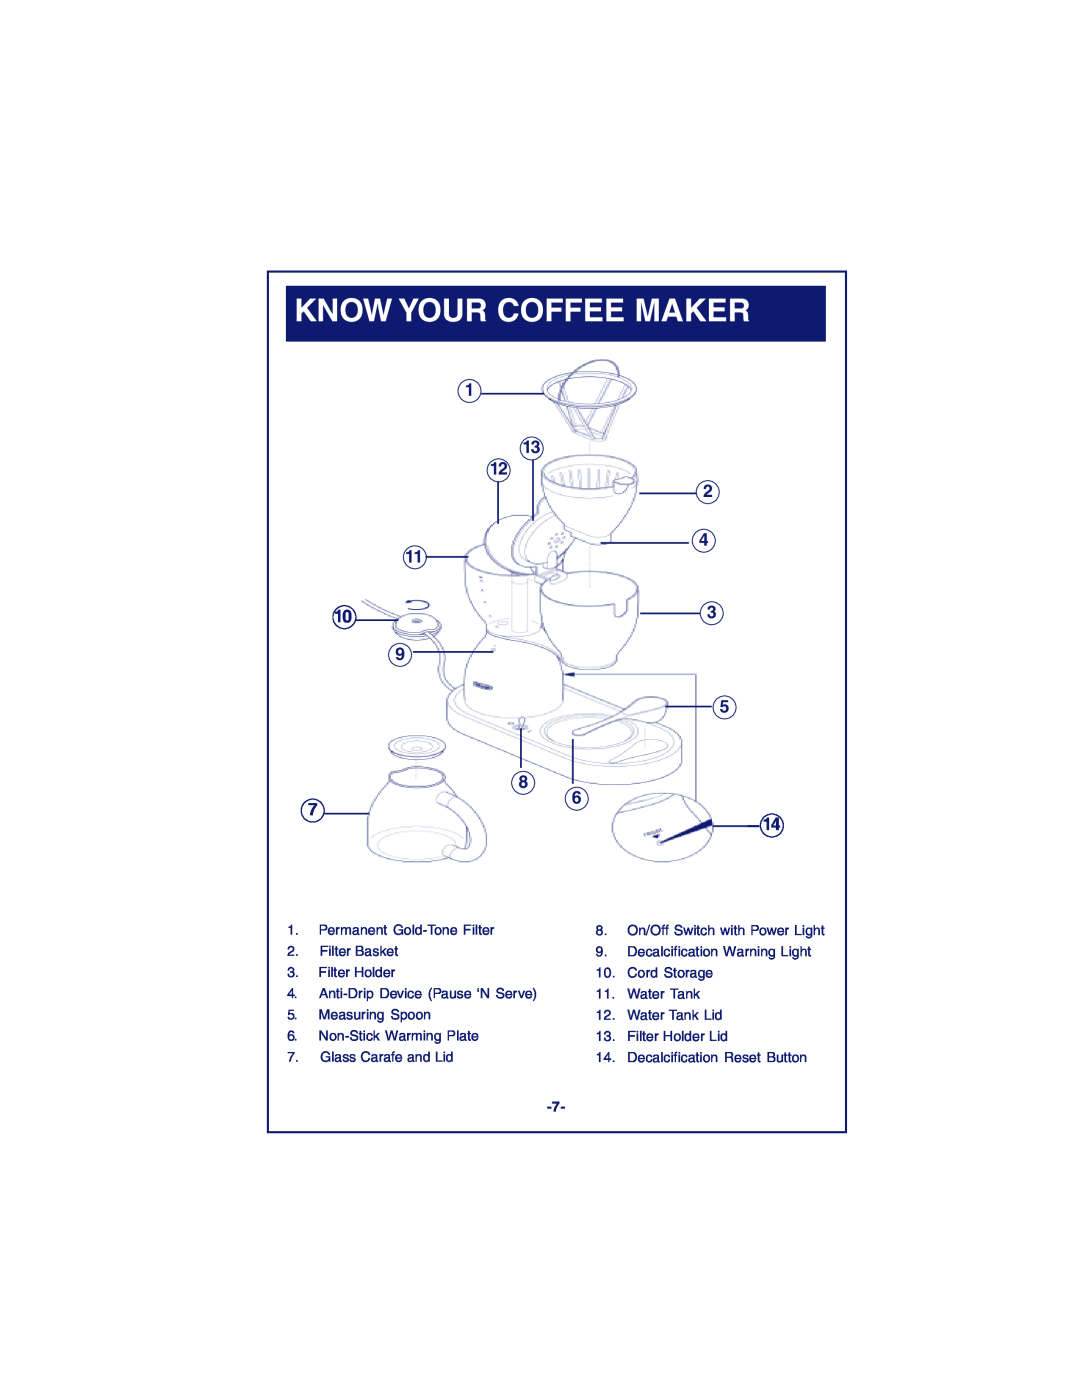 DeLonghi DCM900 instruction manual Know Your Coffee Maker, 1 13 12 2 4 11, 9 5 8, 6 14 